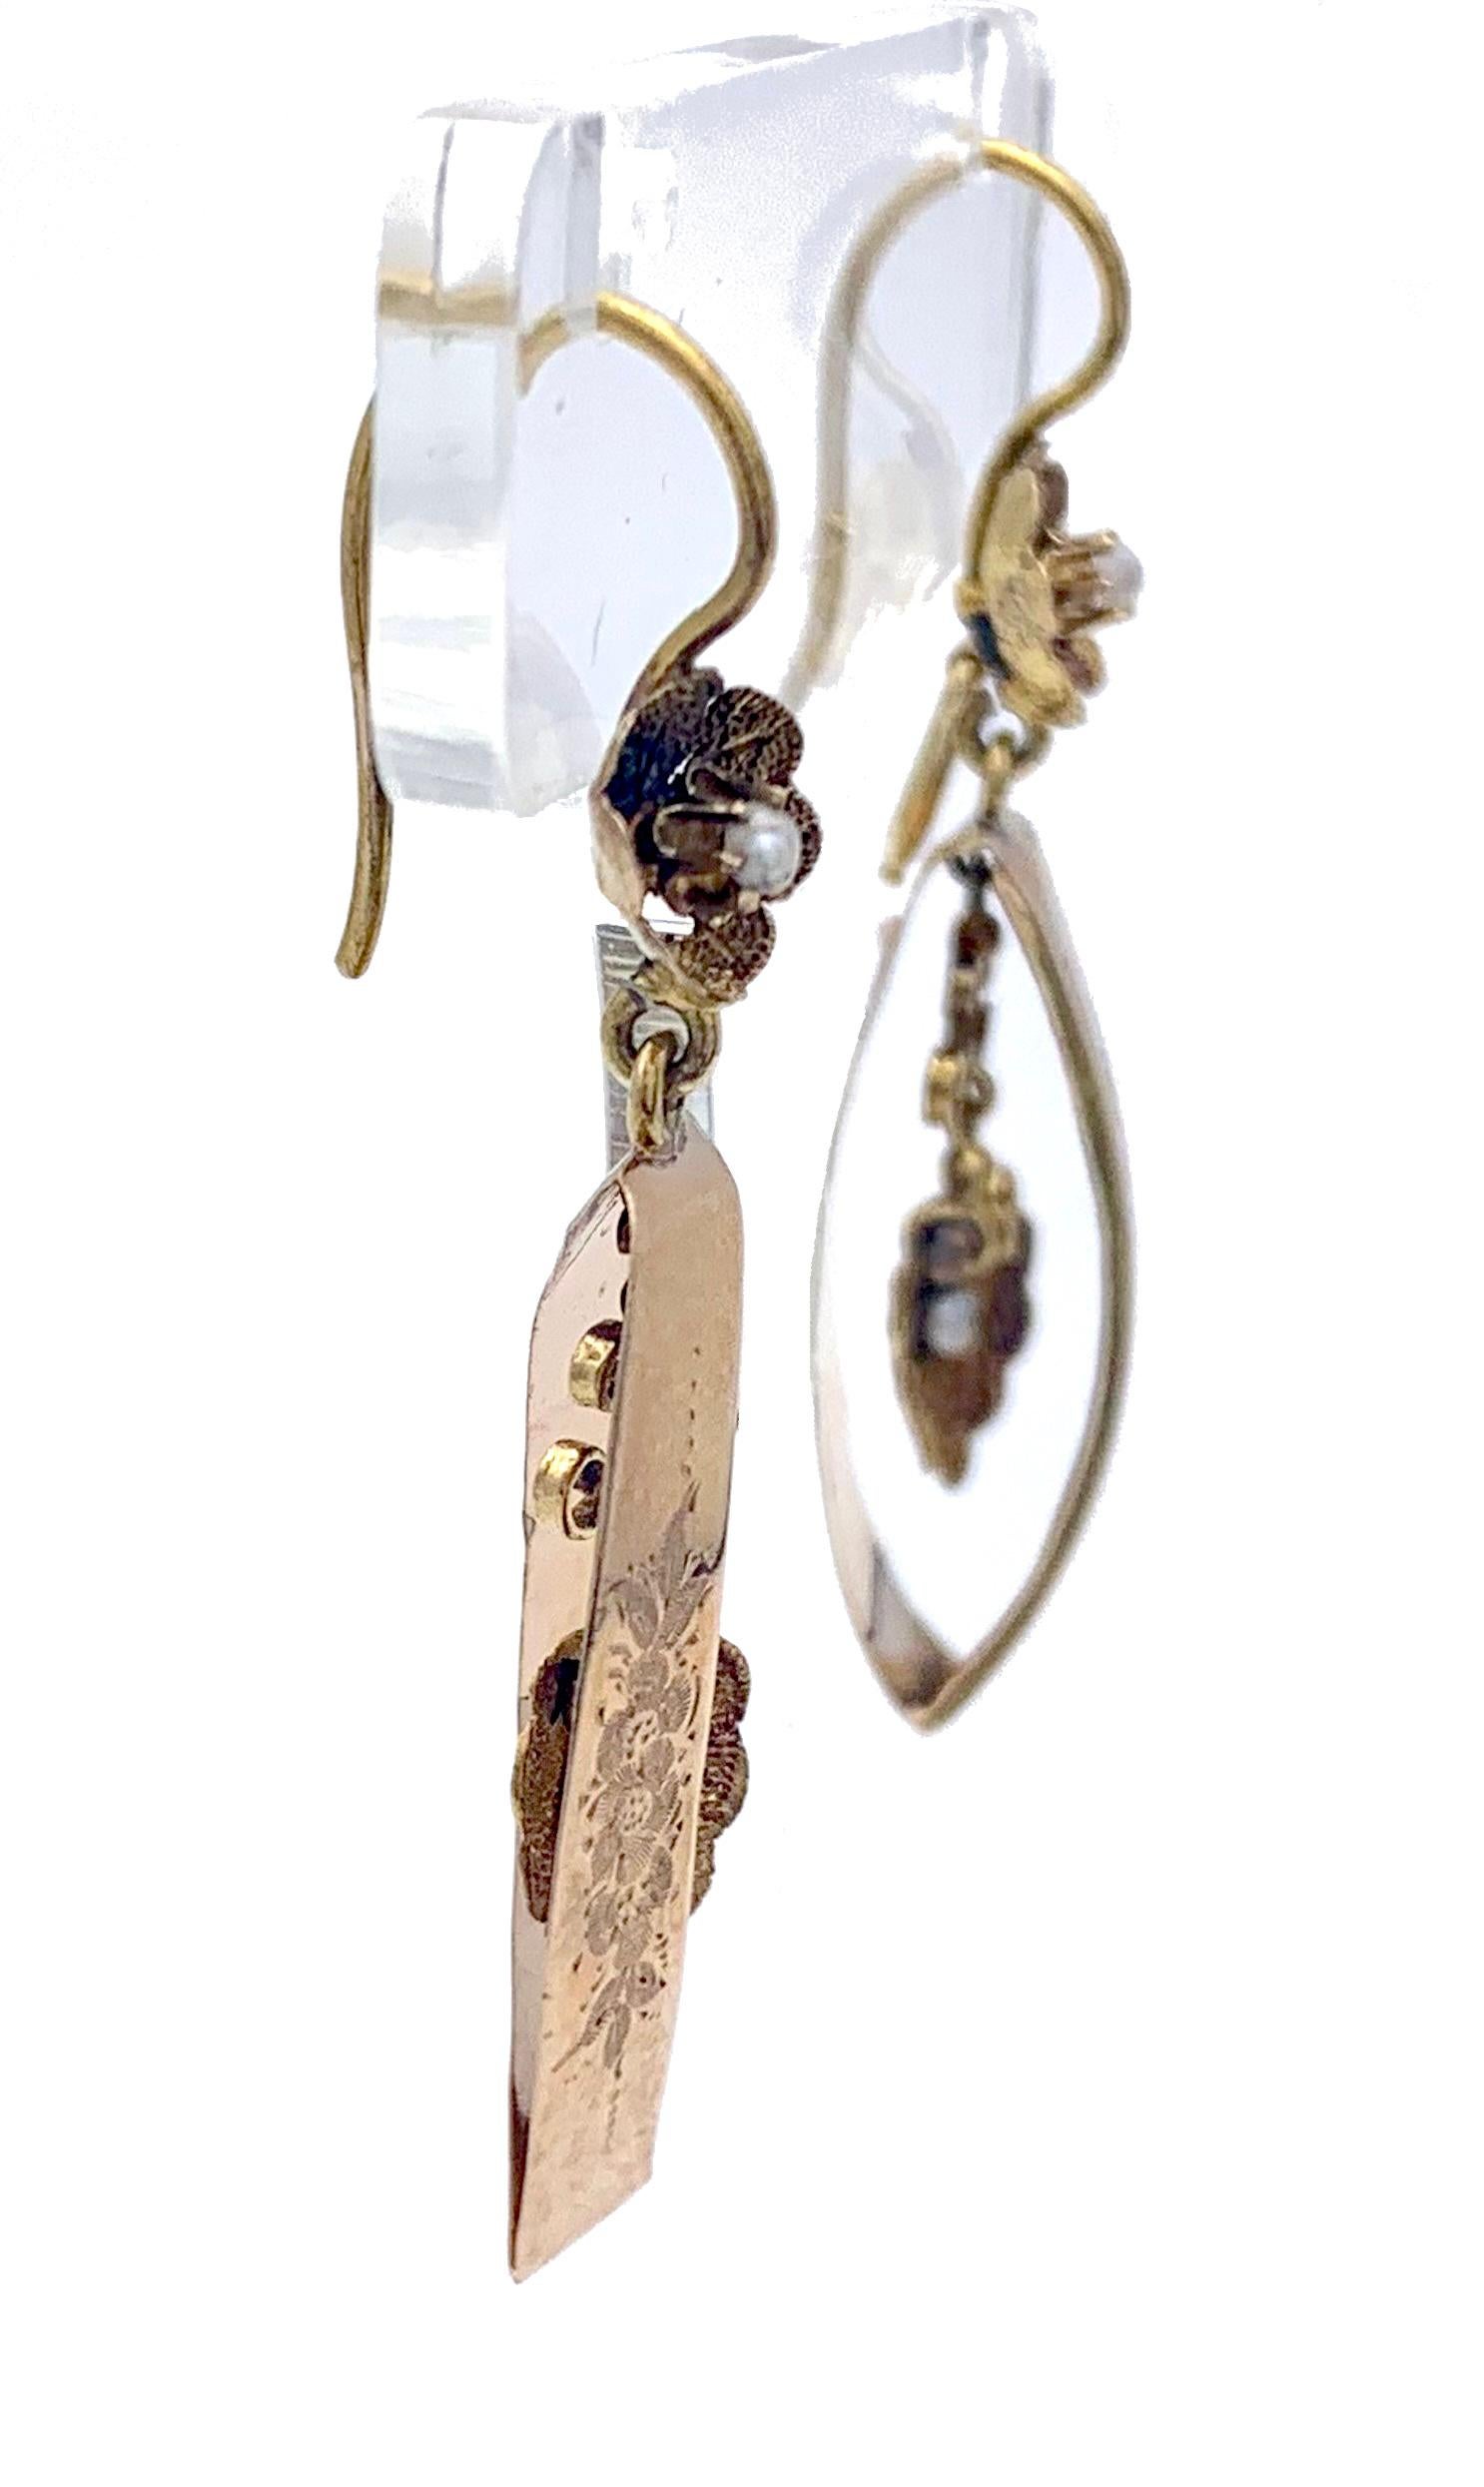 These unusual dangling earrings have been fandcrafted out of 14 karat rose gold in 1845 ca. The earrings are designed as a pair of ellipses hanging from little flowers. Inside the ellipses two articulated scallops are suspended adding extra movement